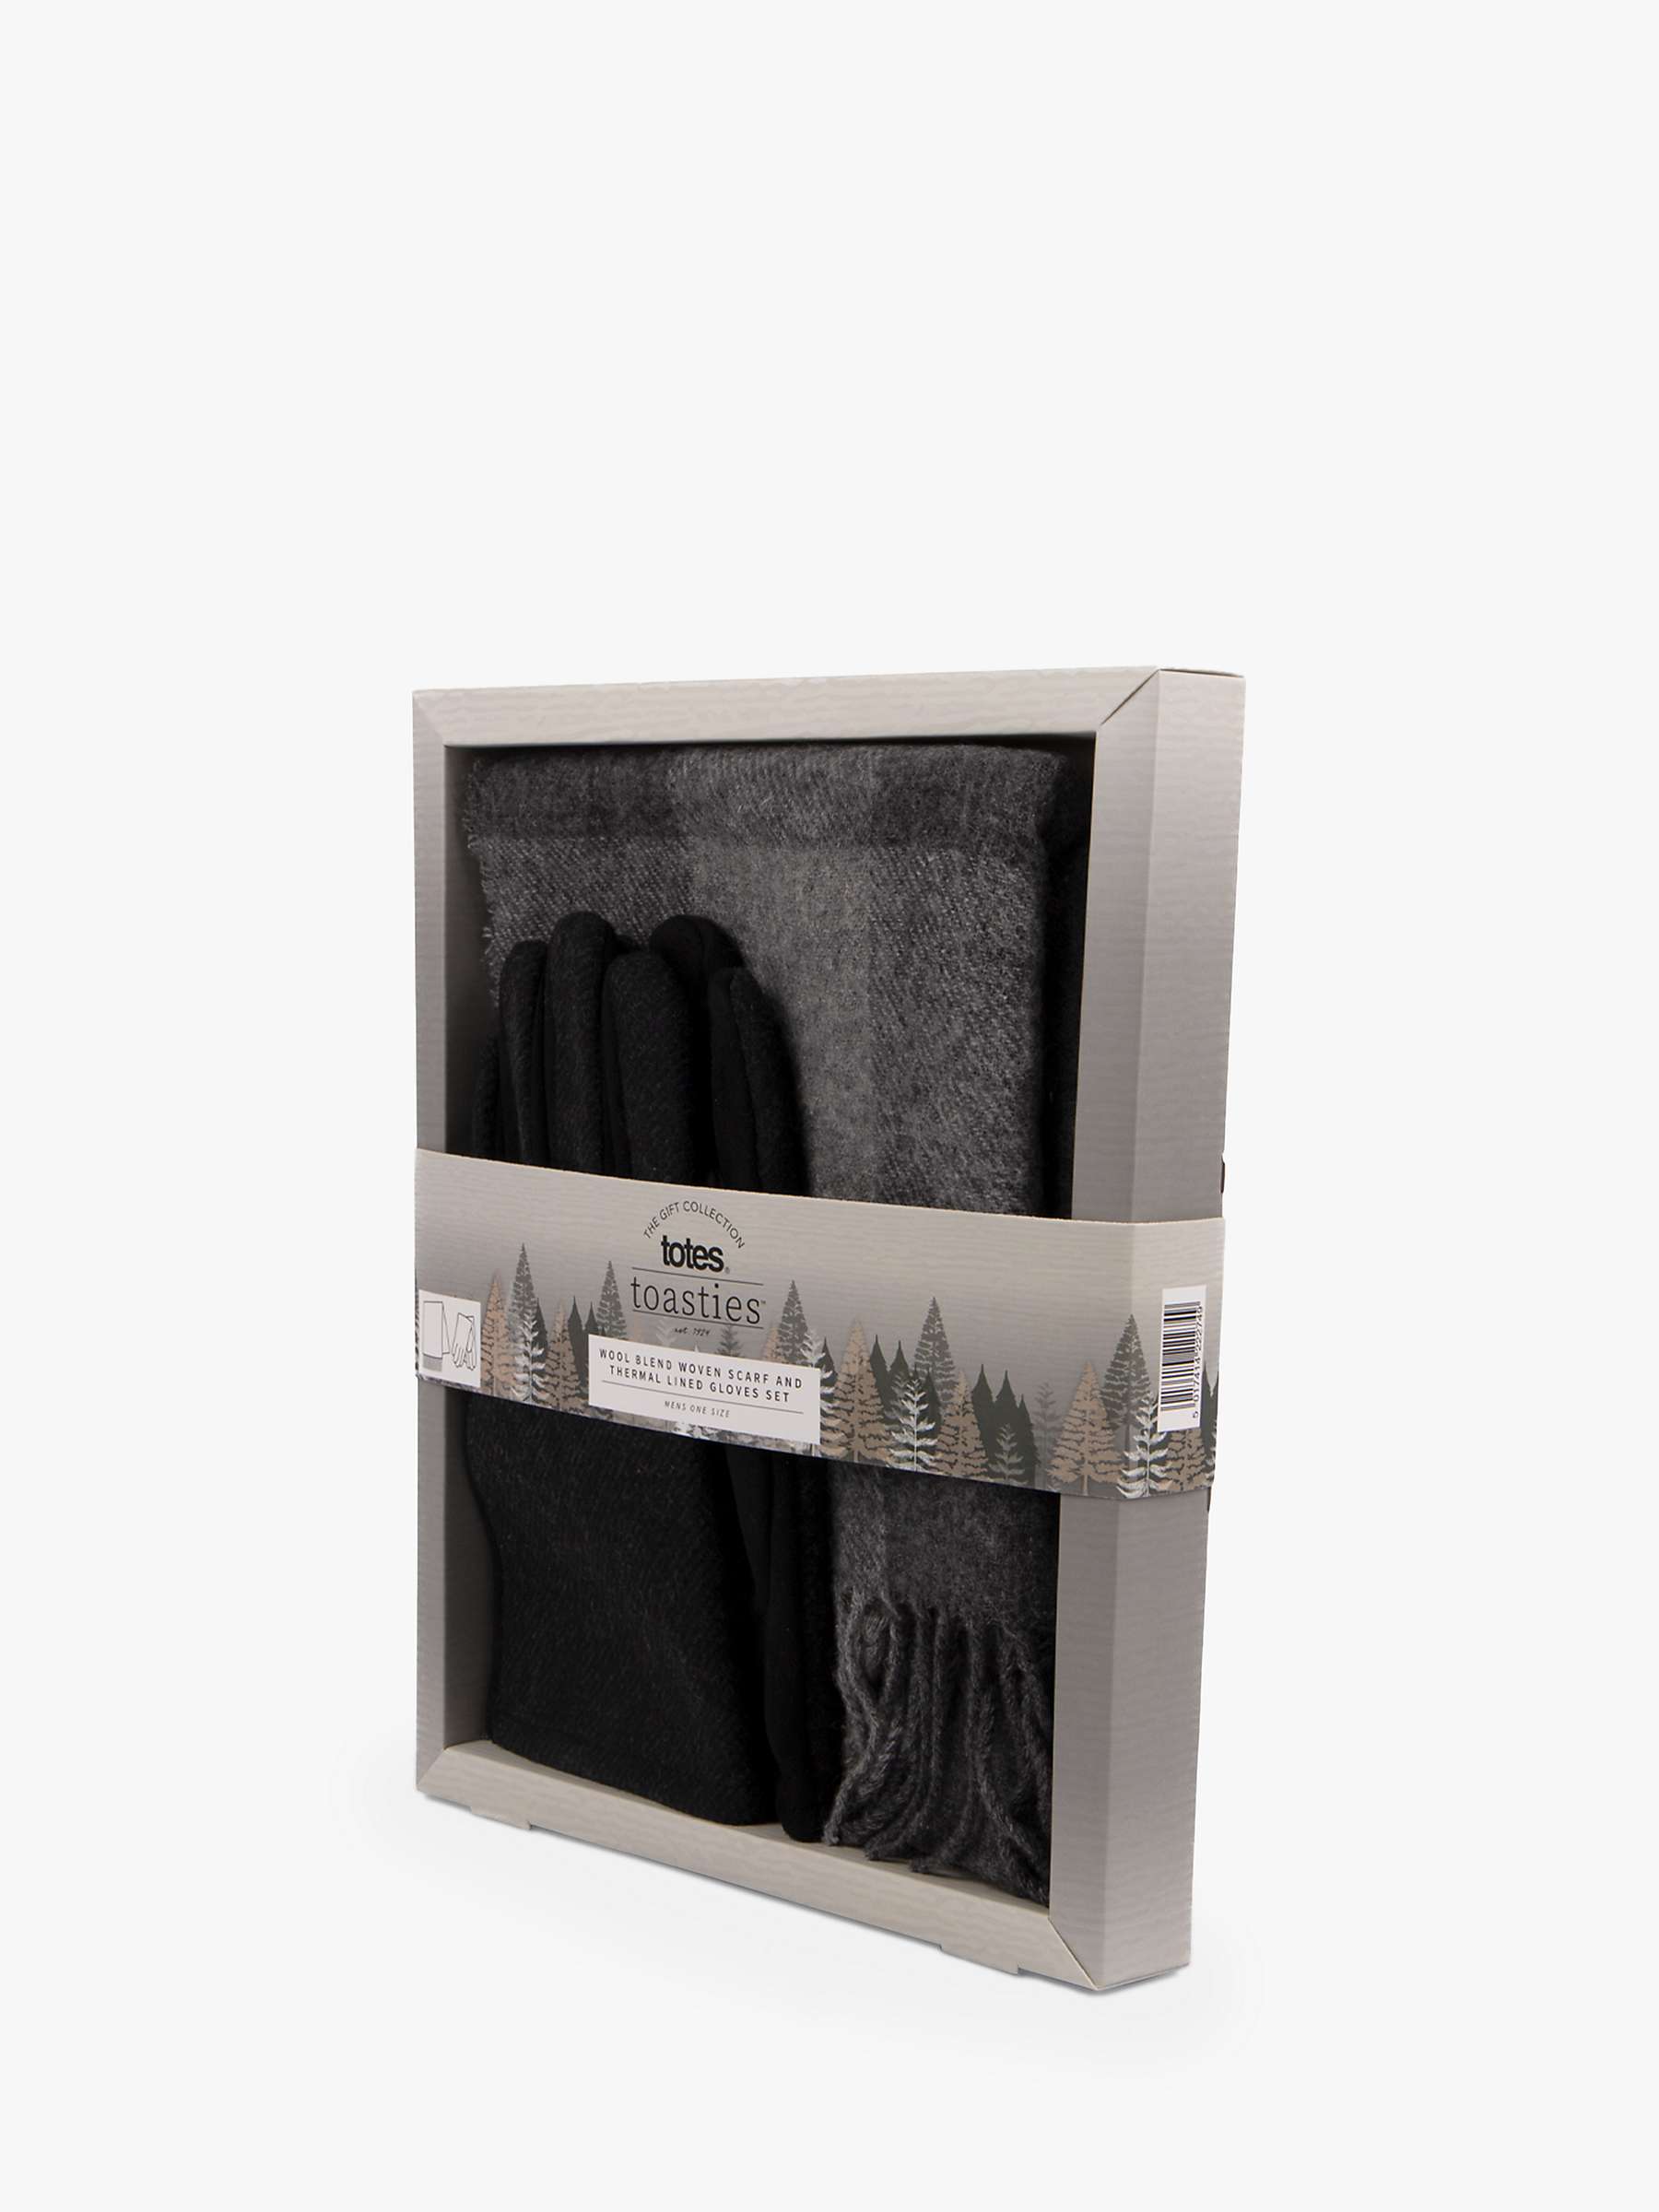 Buy totes Wool Blend Check Scarf and Thermal Lined Gloves Set, Grey/Multi Online at johnlewis.com